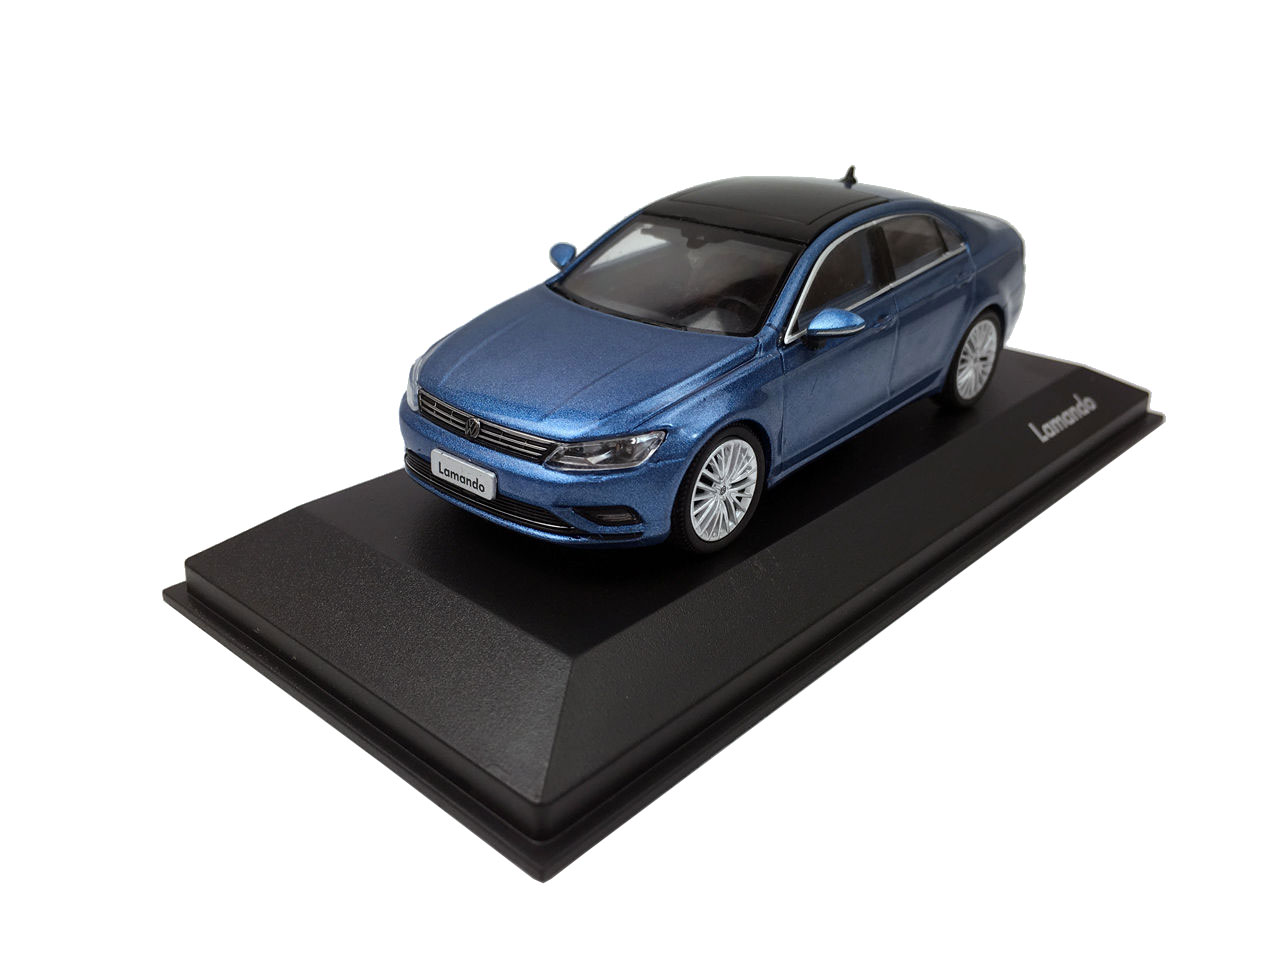 where to buy diecast model cars